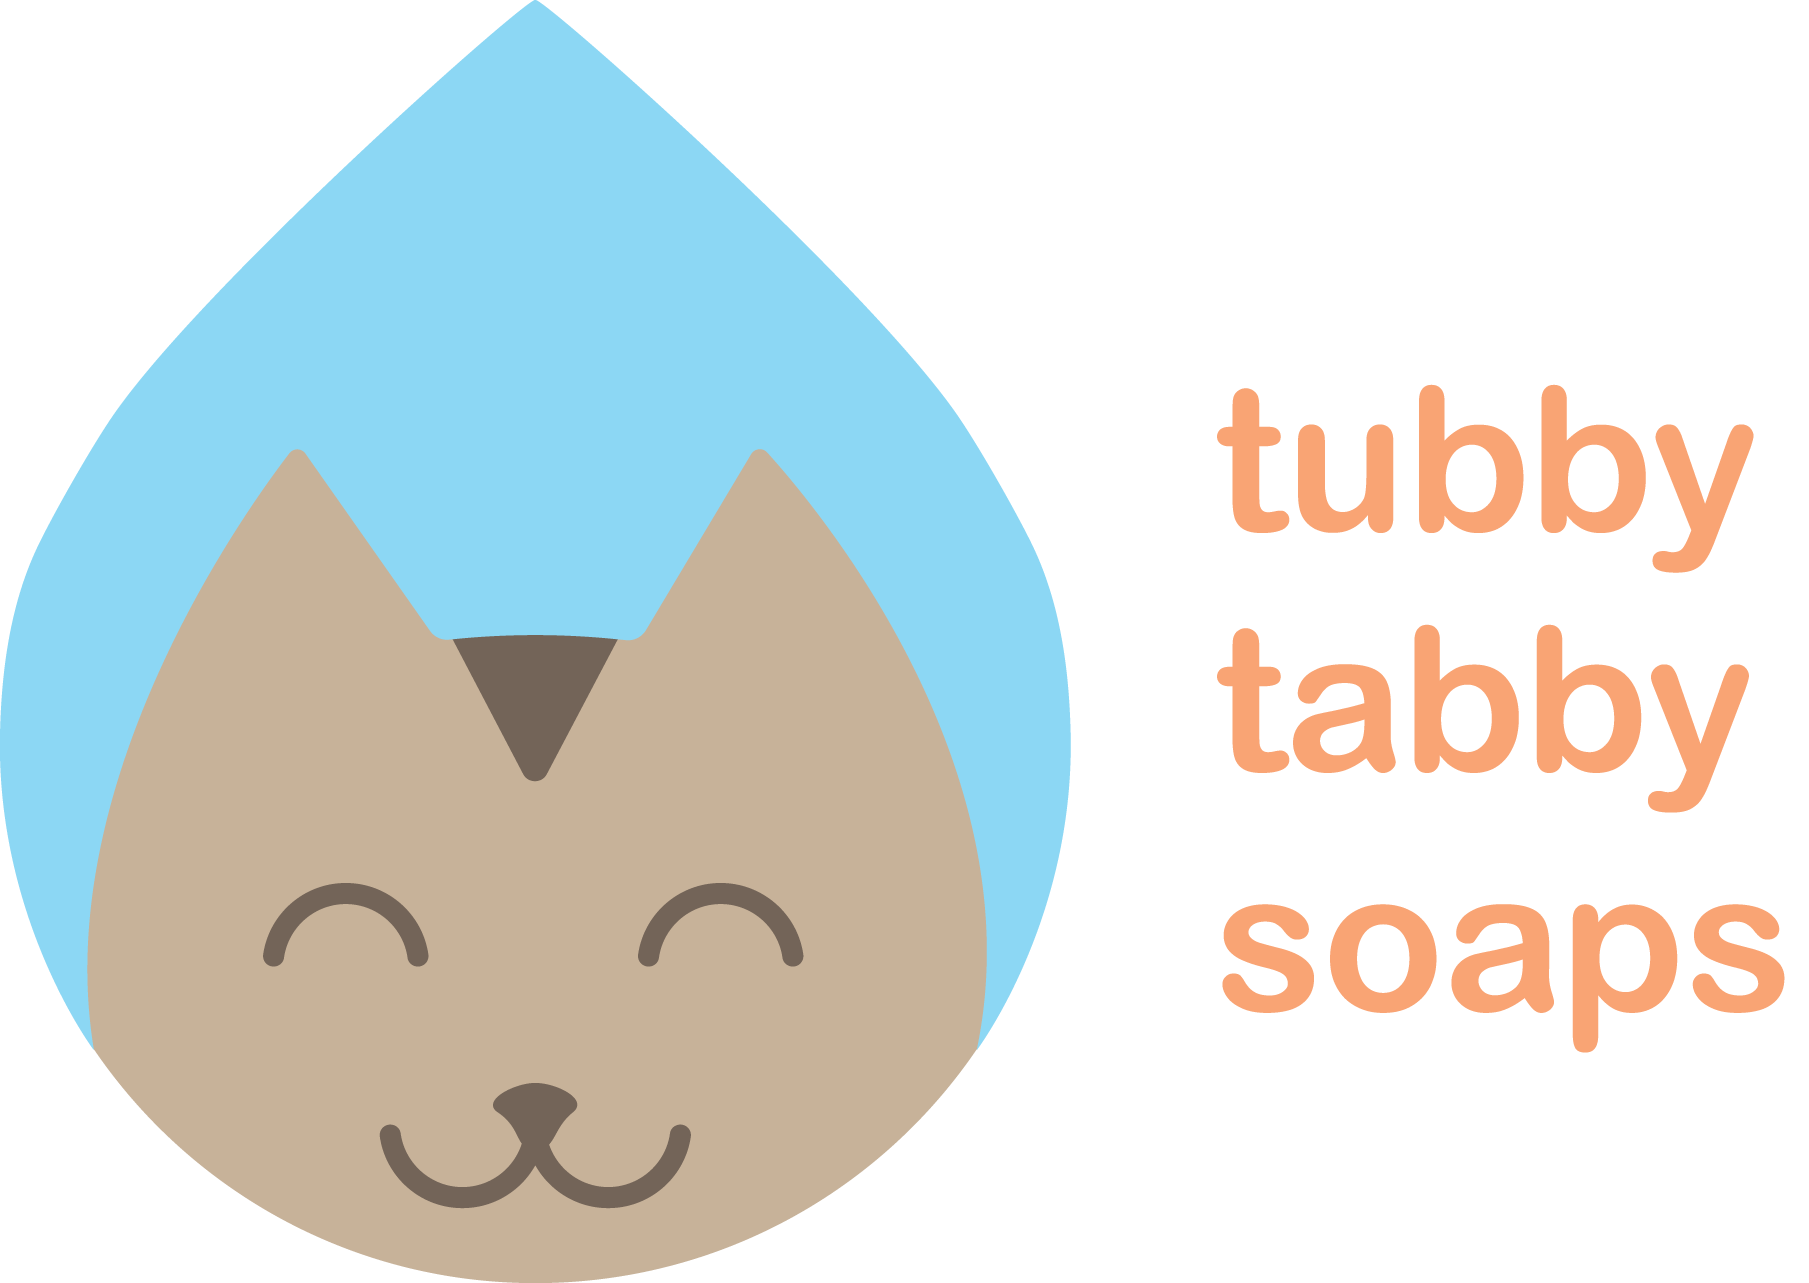 Tubby Tabby Soaps (handmade artisan soaps made in small batches in Ottawa, Ontario)